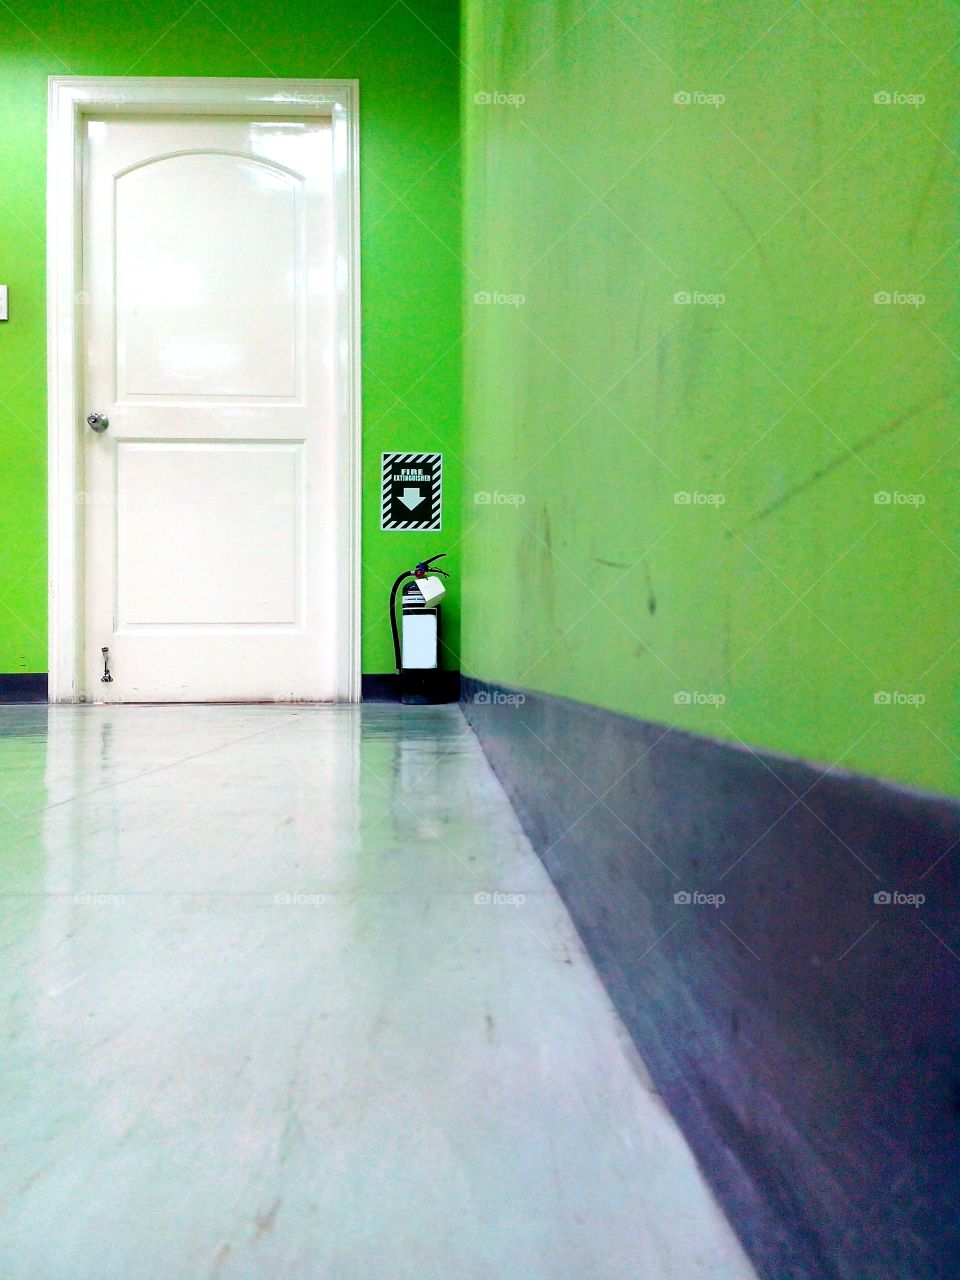 green wall, white door. white door in a room with green wall and a fire extinguisher